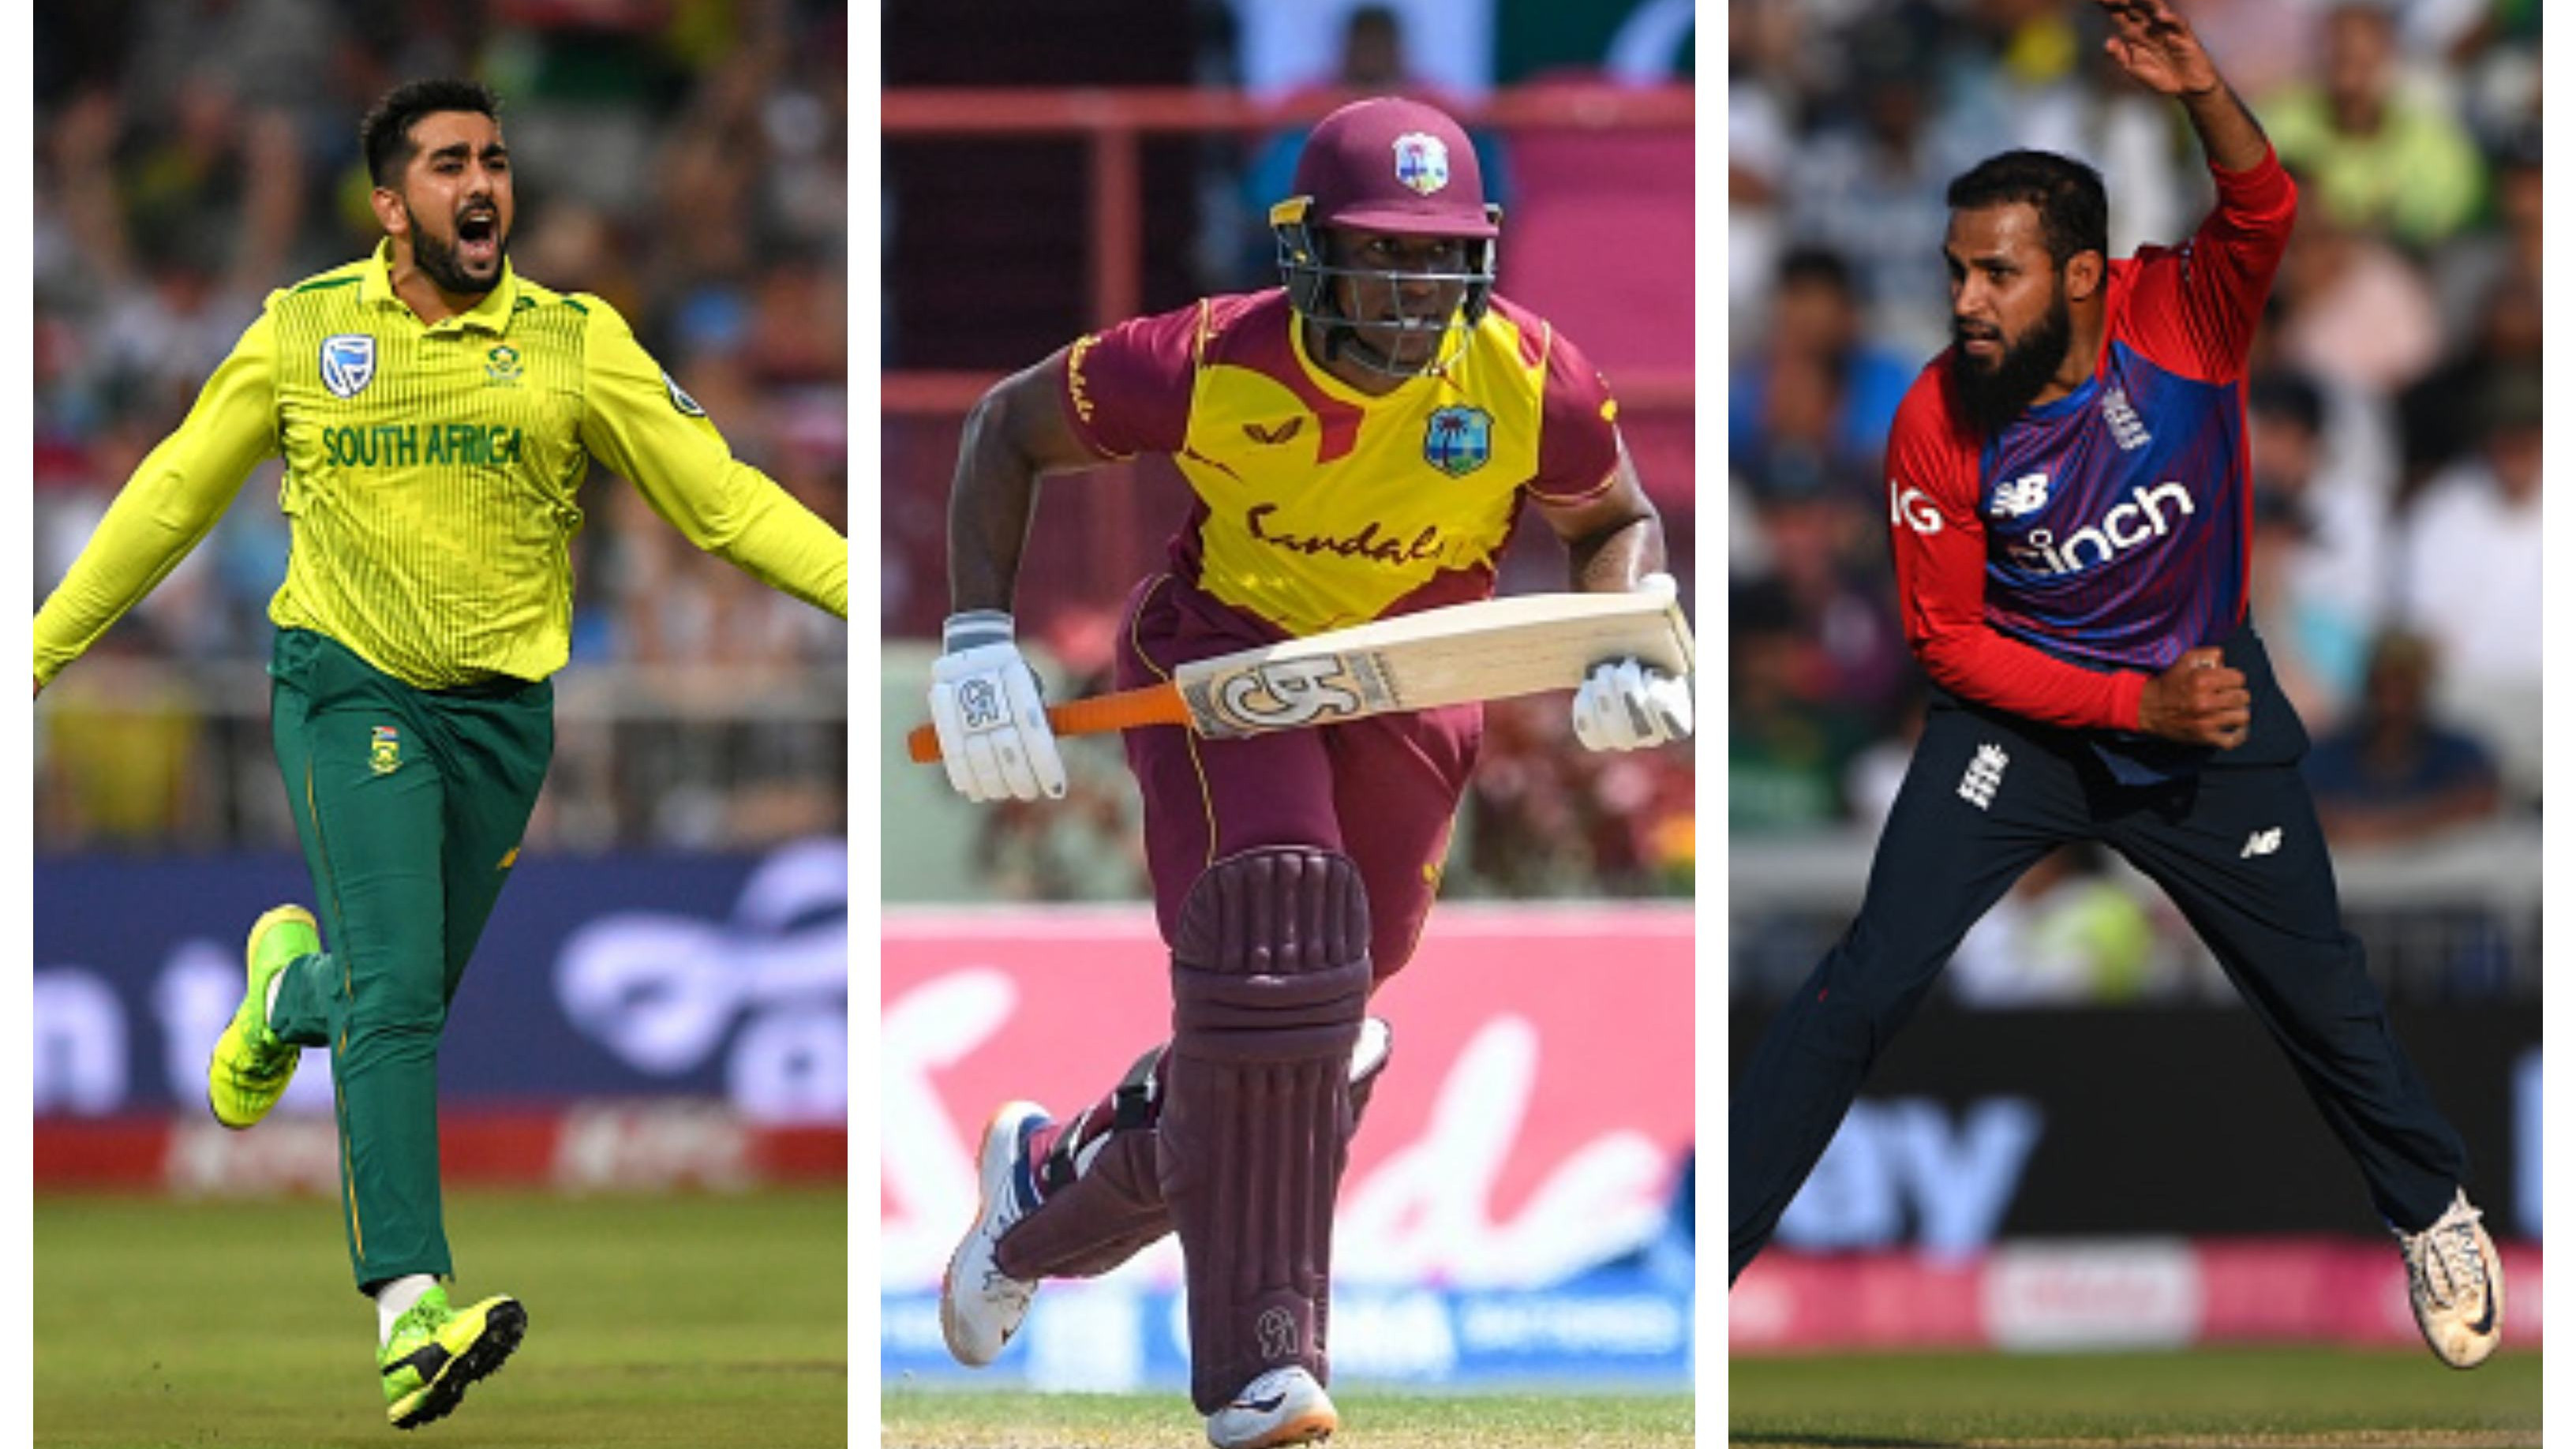 IPL 2021: IPL confirms final list of replacements for each franchise